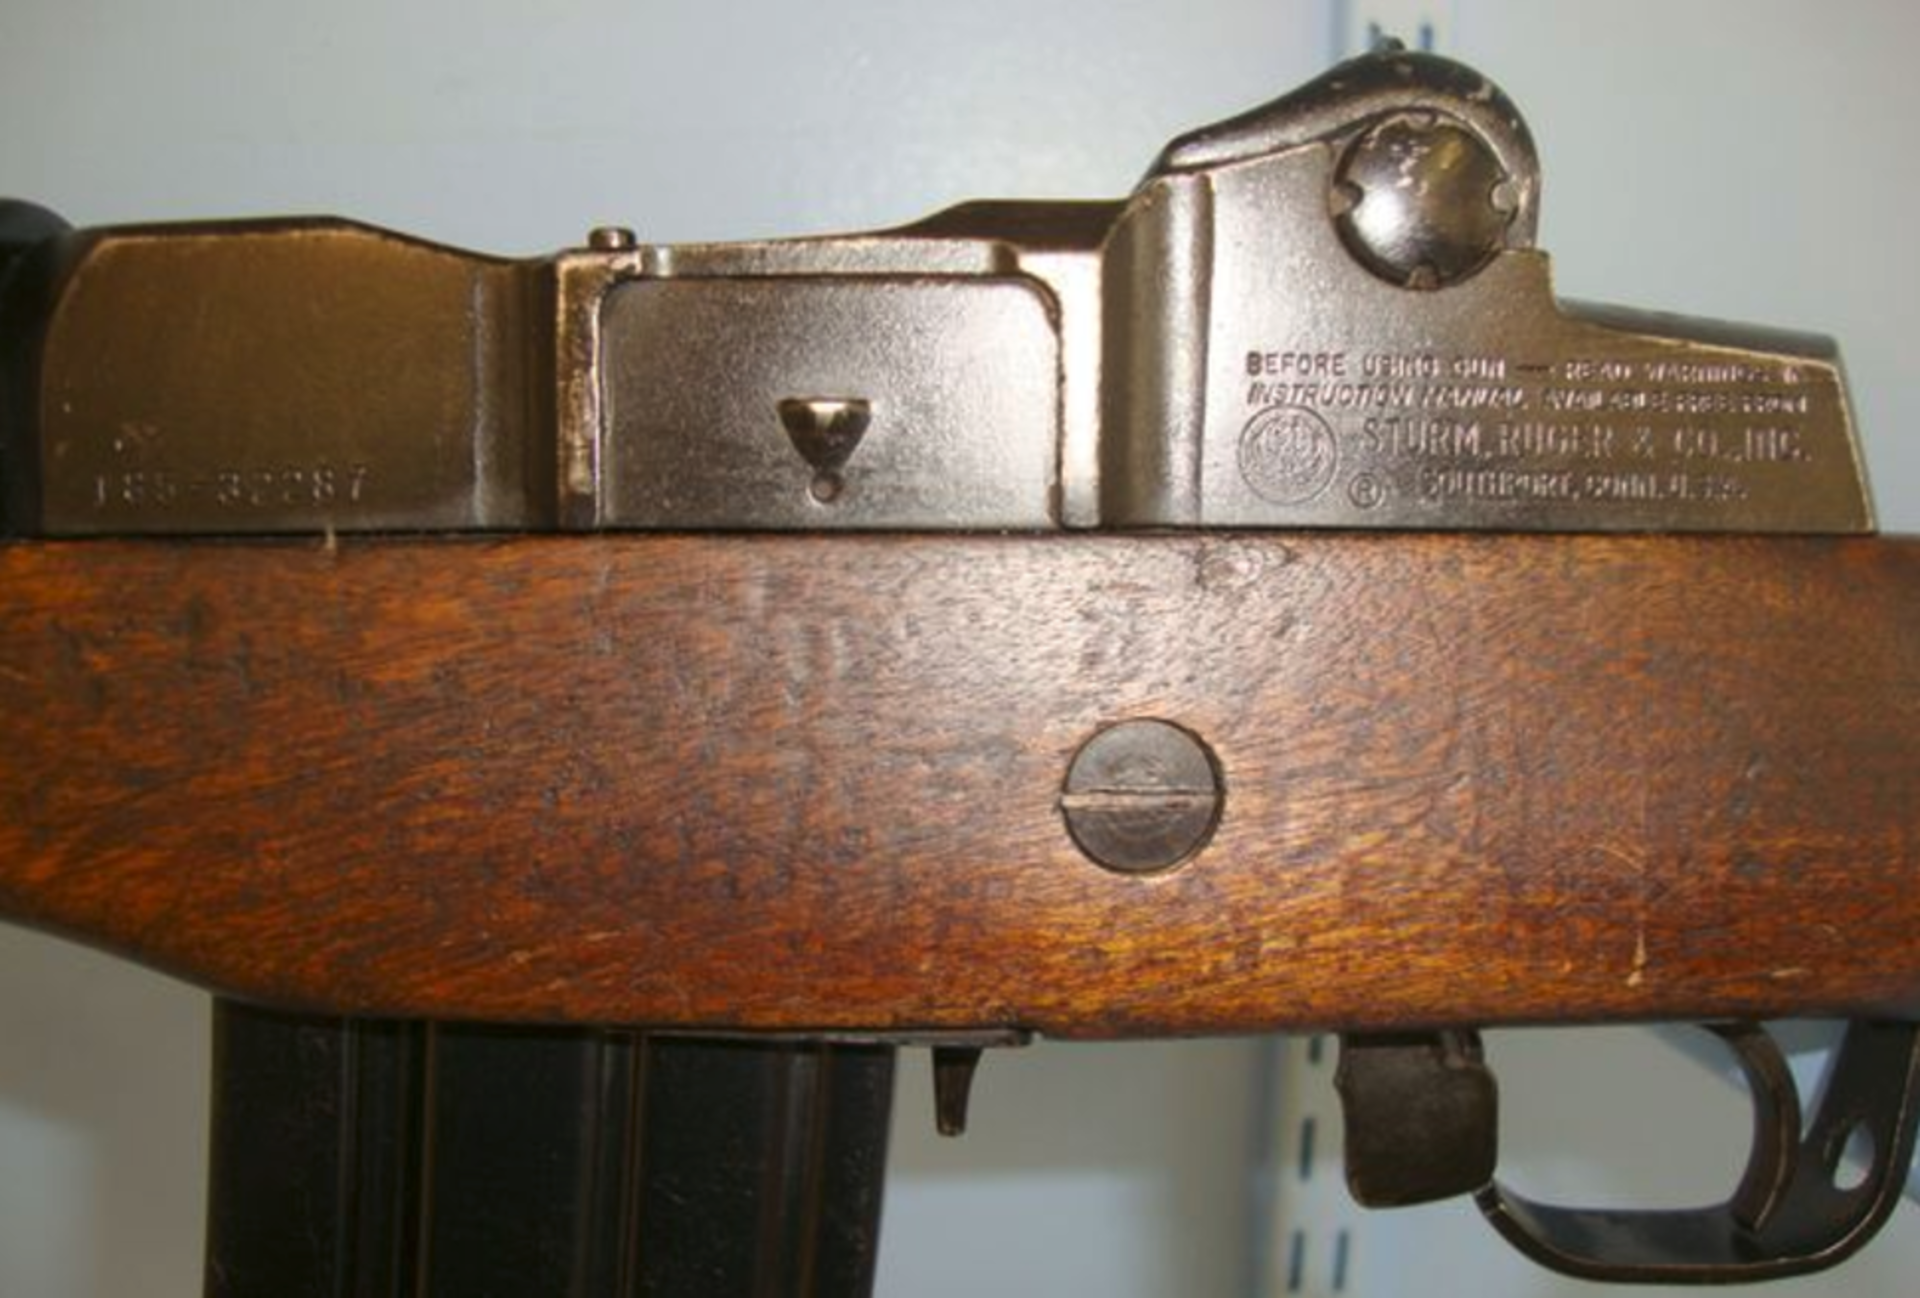 1973 To Present, USA Sturm Ruger Mini-14 .223 Calibre Semi Automatic Carbine With Sling - Image 2 of 3